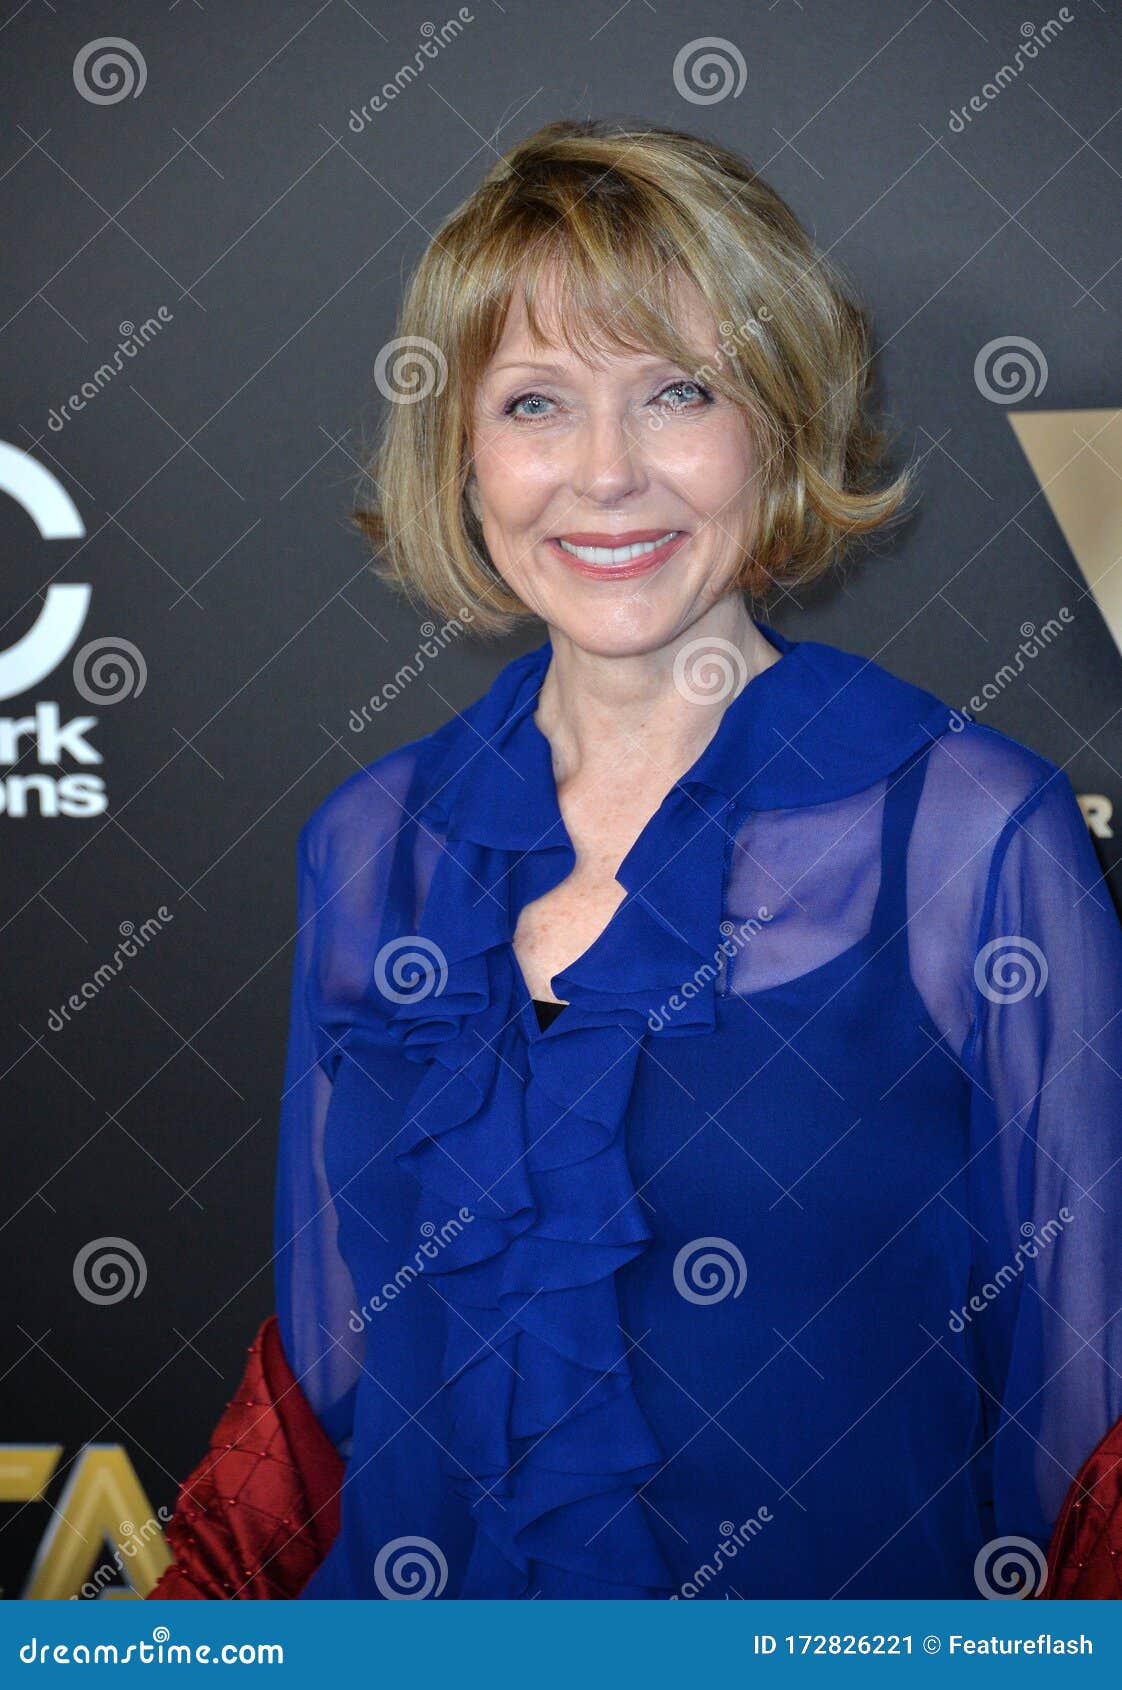 Susan blakely pictures